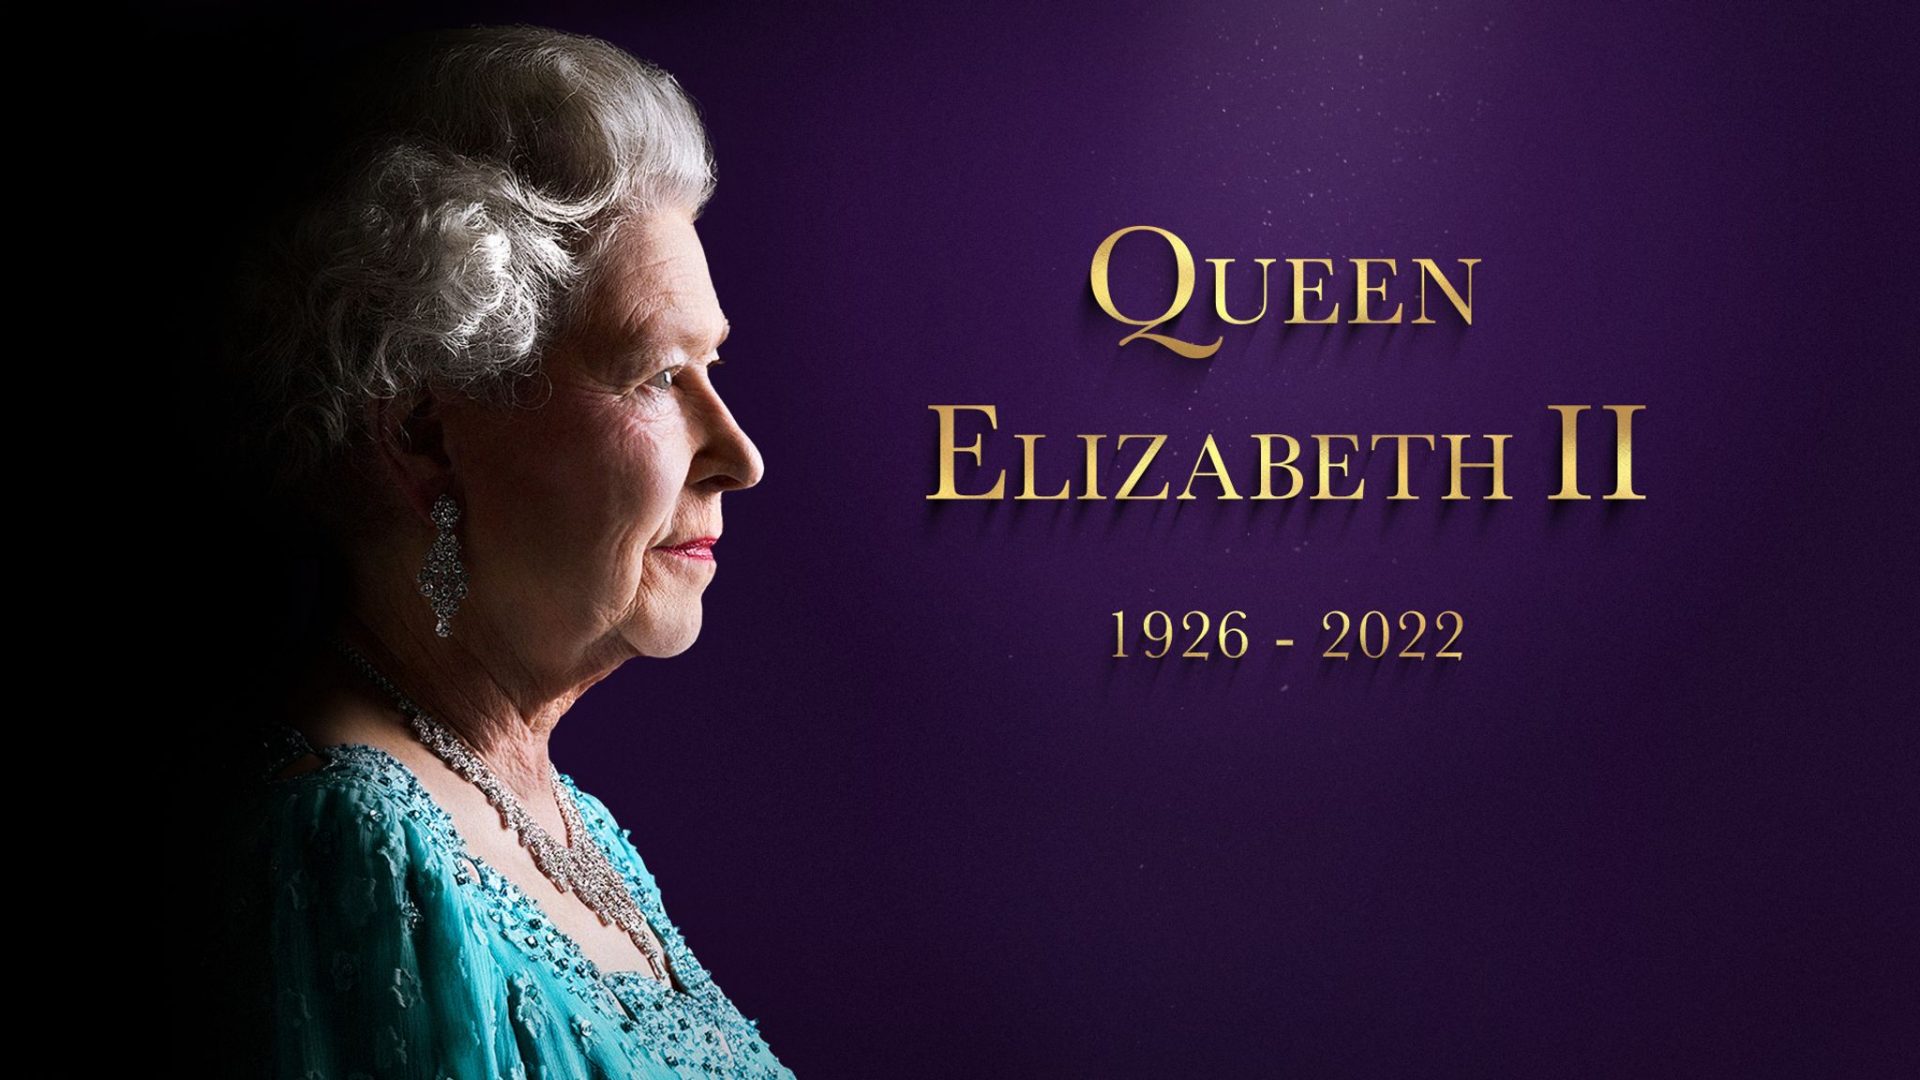 State Funeral Queen Elizabeth II– Monday 19th September 2022